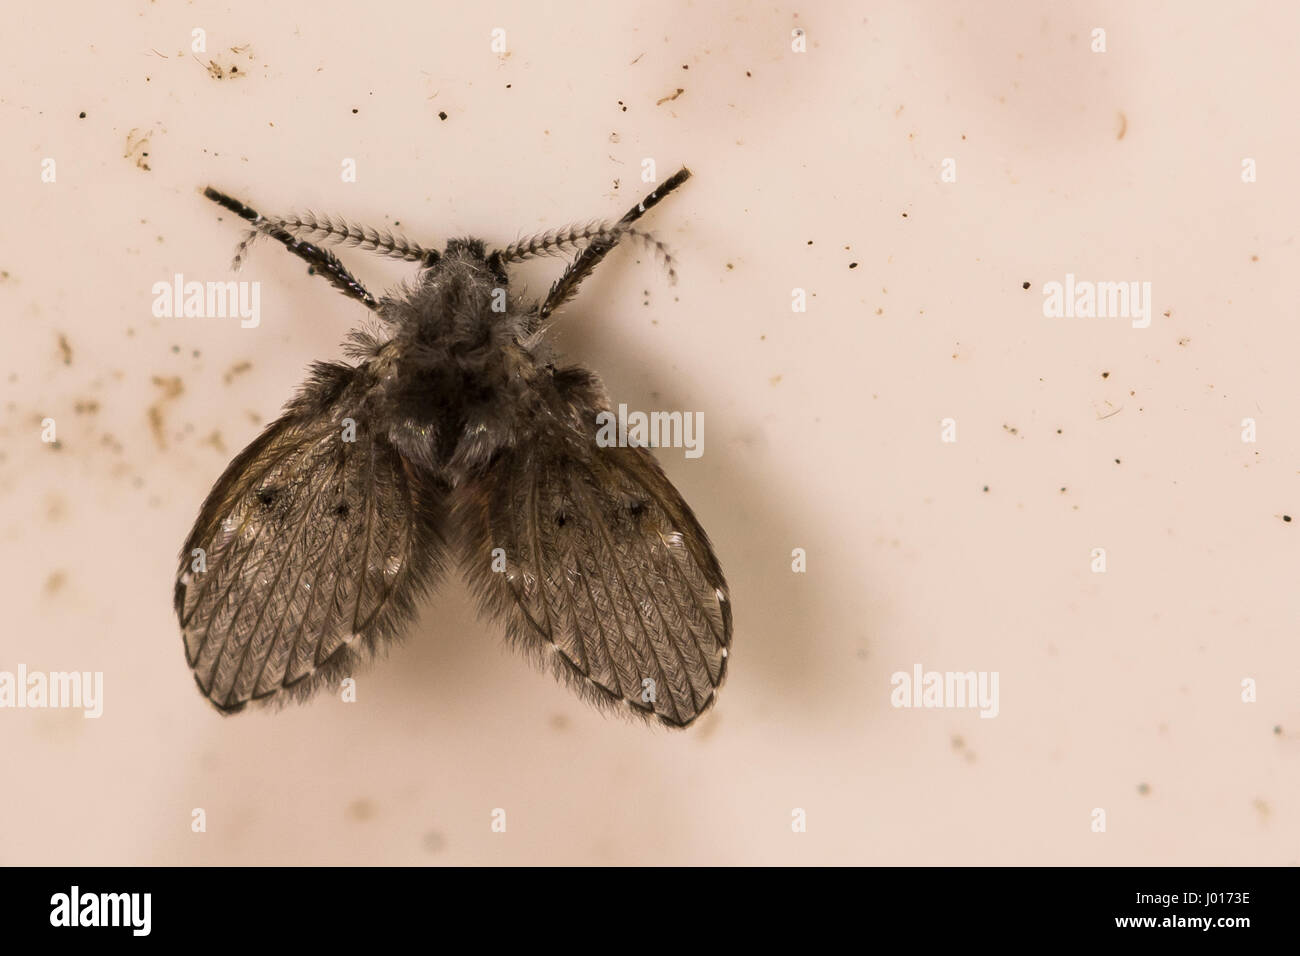 A close up of a Moth Fly in a Pvc pipe Stock Photo